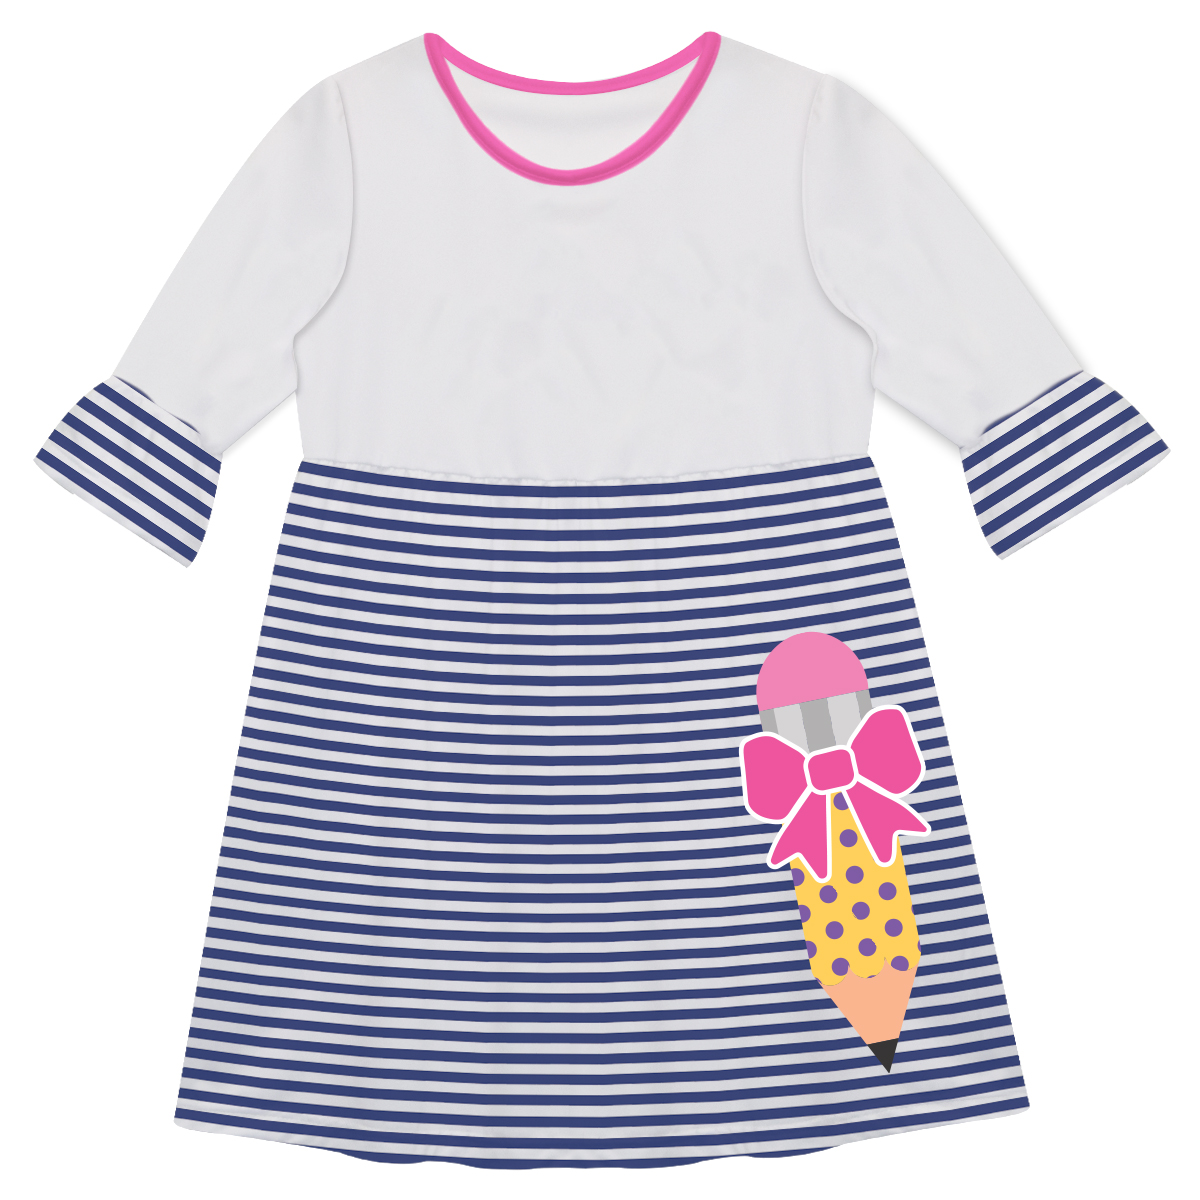 Pencil and Bow Name Navy and White Stripes Amy Dress 3/4 Sleeve - Wimziy&Co.